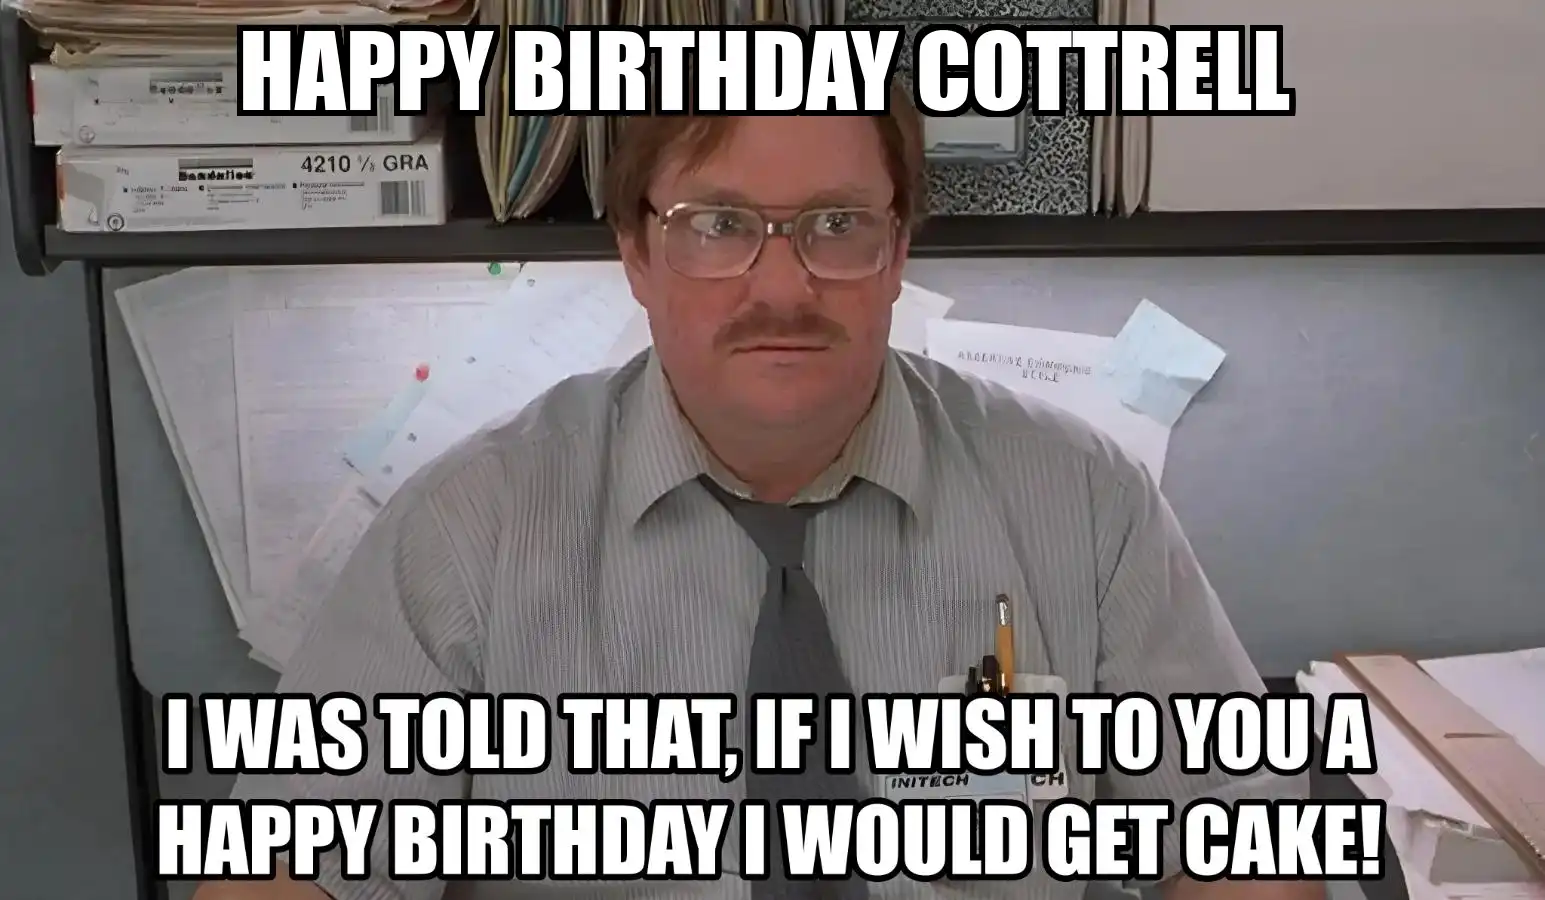 Happy Birthday Cottrell I Would Get A Cake Meme